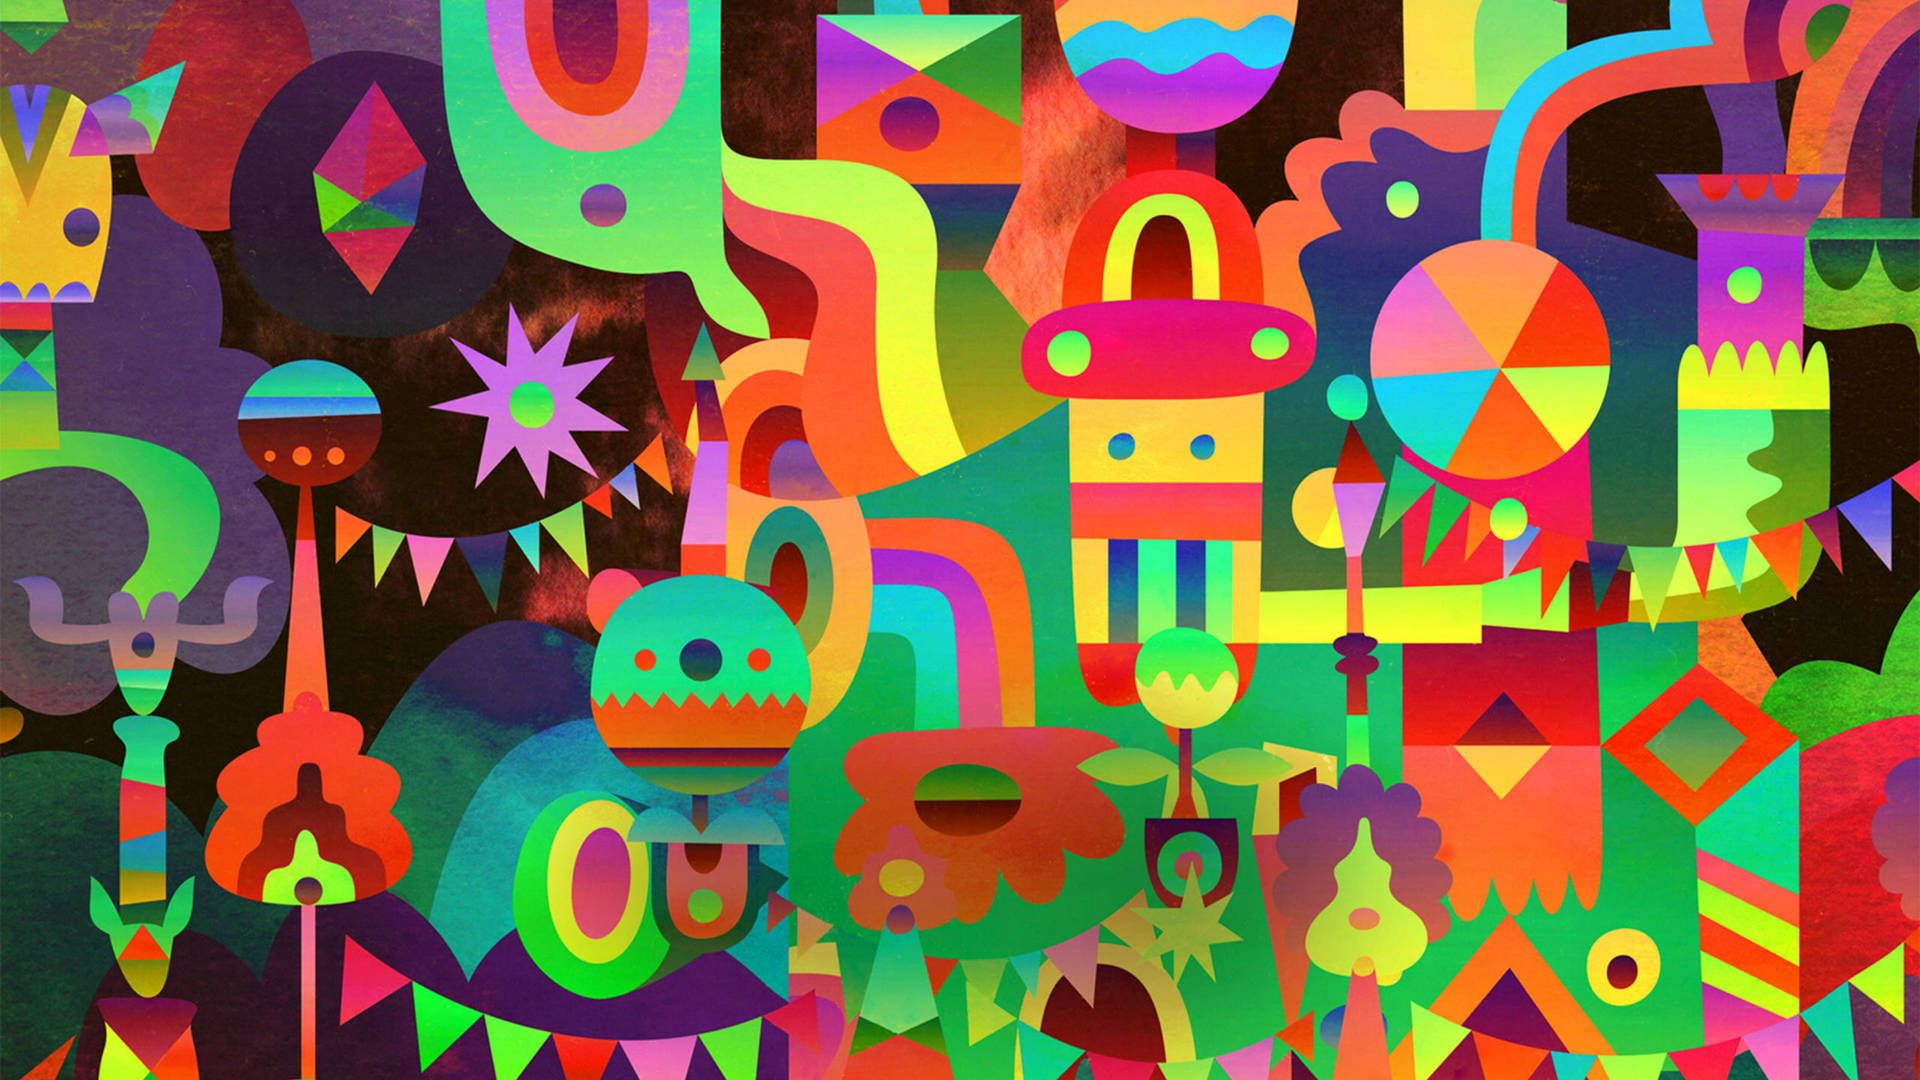 A colorful abstract painting of many different shapes and colors. - Doodles